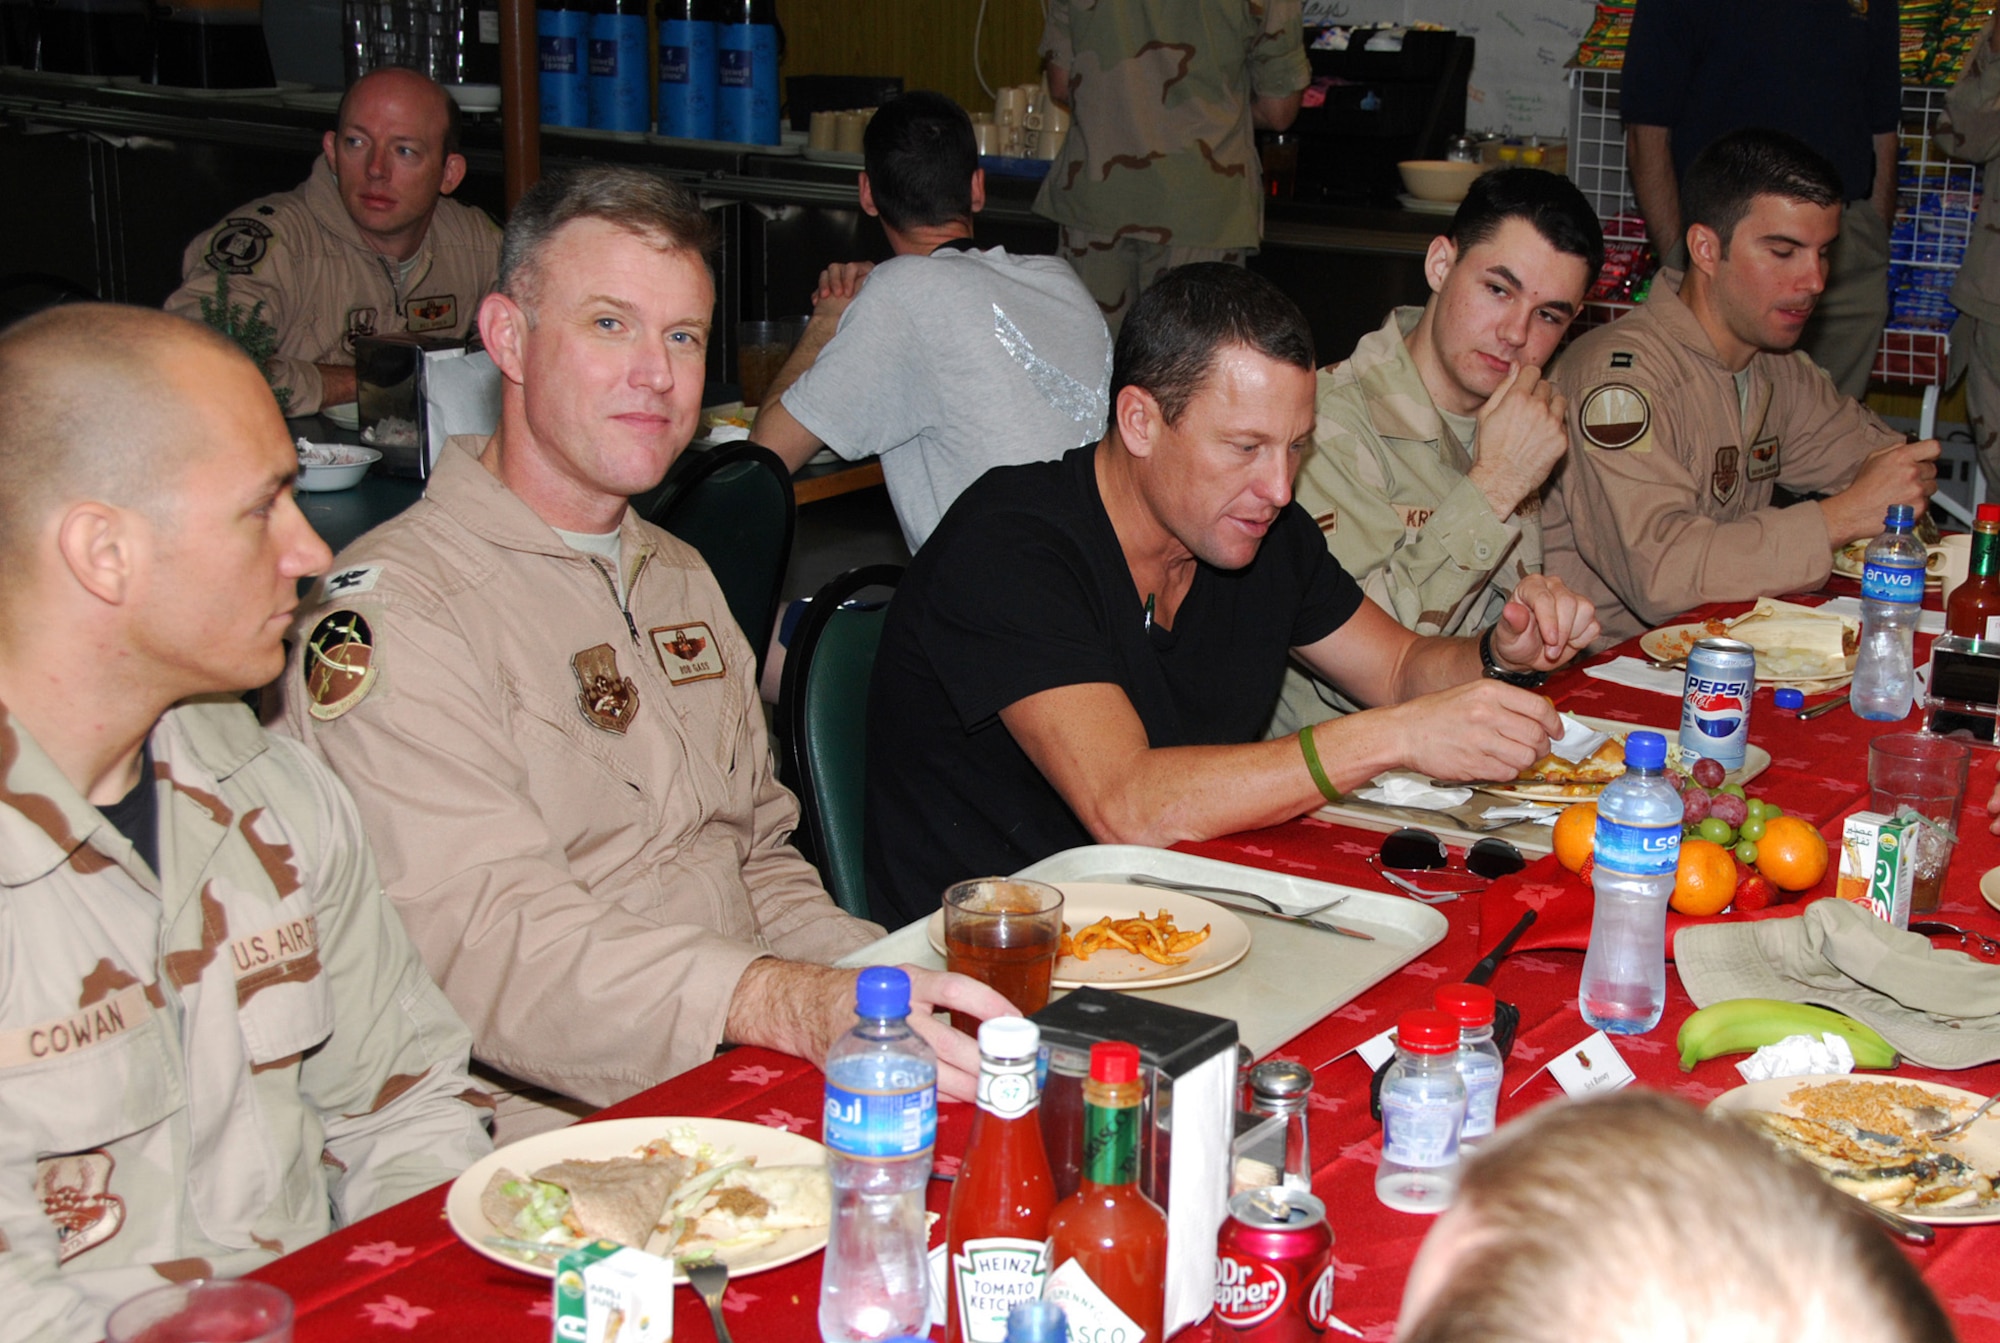 SOUTHWEST ASIA - Lance Armstrong, seven-time winner of the Tour de France, dines with airmen at the Independence Dining Facility at a Southwest Asia air base Dec. 17. Mr. Armstrong is one of five celebrities touring with the USO 2007 holiday show. Other celebrities included Miss USA, Rachel Smith, Kid Rock, Lewis Black and Robin Williams. (U. S. Air Force photo/Staff Sgt. Douglas Olsen)